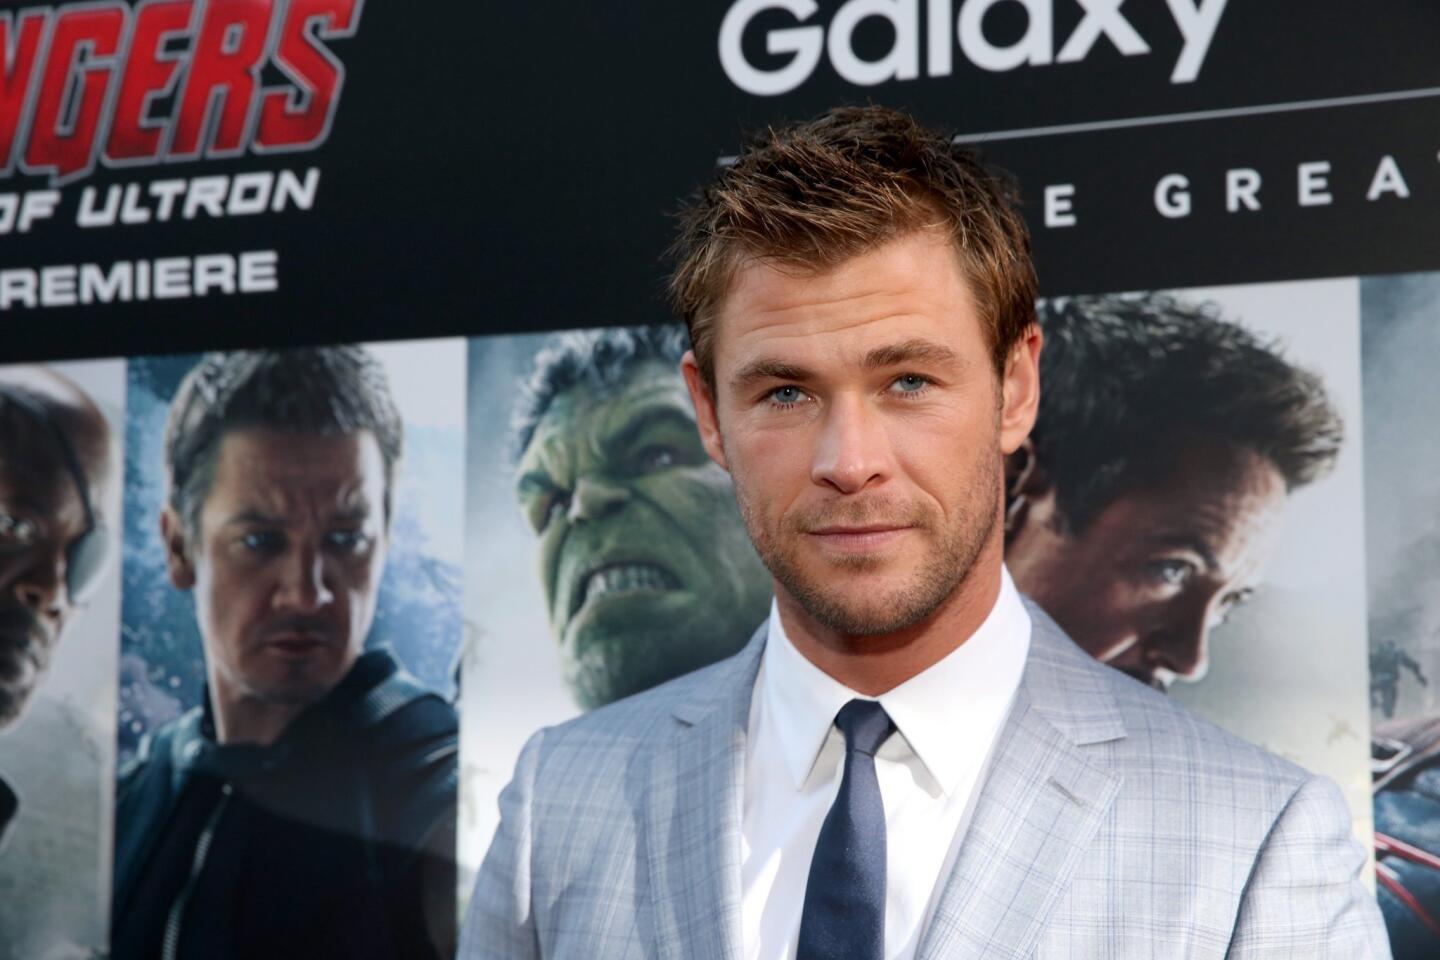 Actor Chris Hemsworth arrives at the Los Angeles premiere of "Avengers: Age Of Ultron" at the Dolby Theatre in Hollywood.